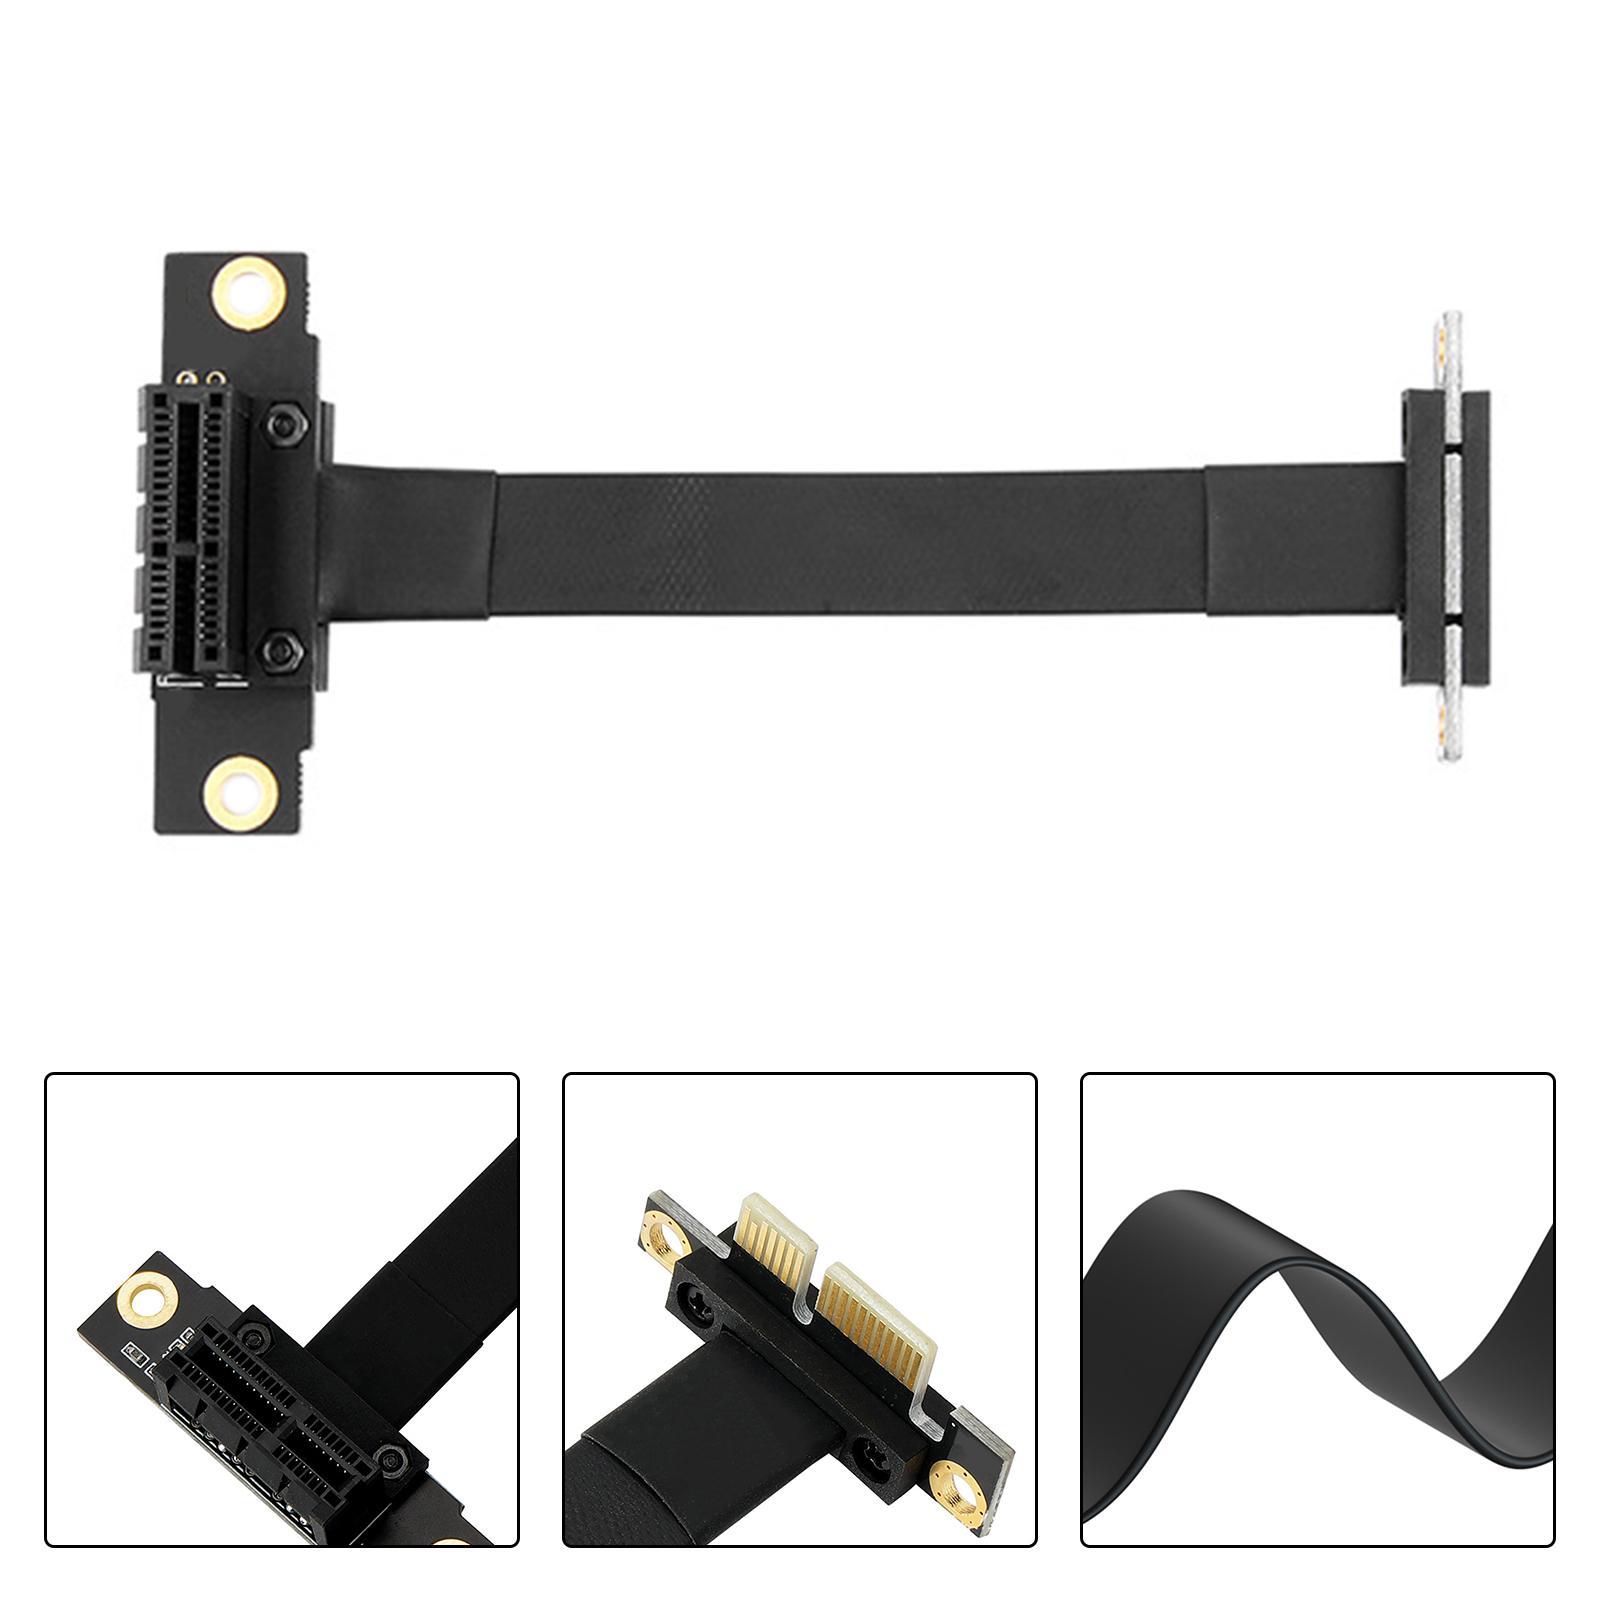 90 Degree PCI Express Extension Cable, PCIe x1 to x1 x4 Mini Pci-E Riser Card for Motherboard ,Extender ,Adapter Data Cards Acquisition Card